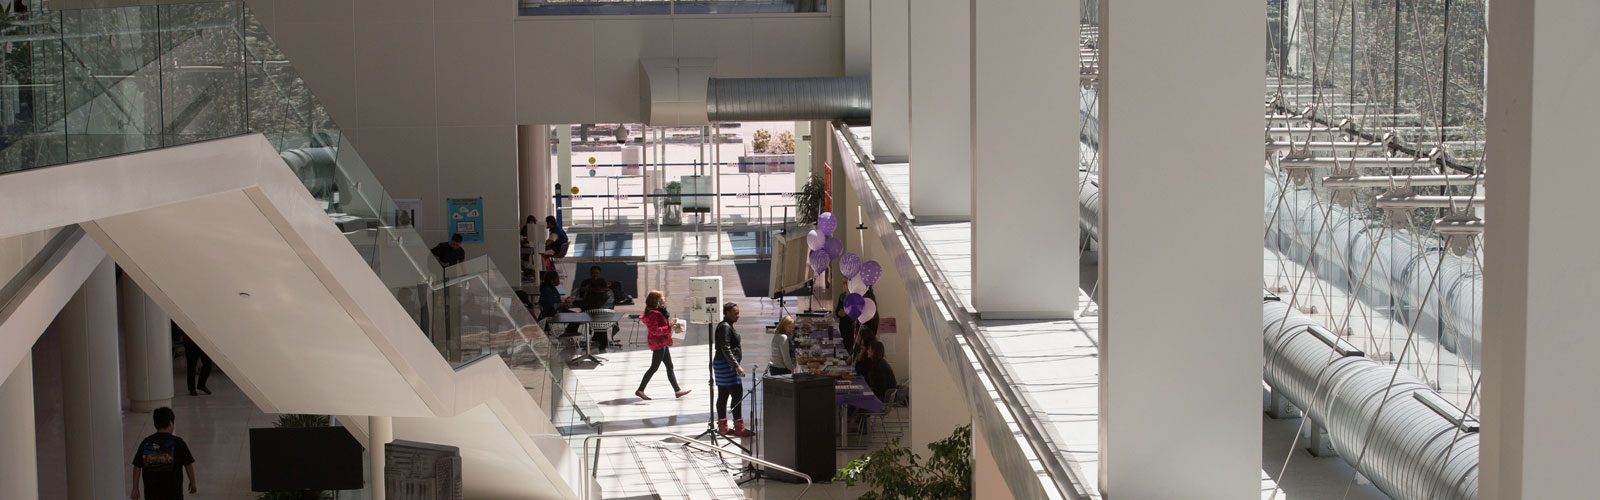 A view of the atrium at the Stamford campus